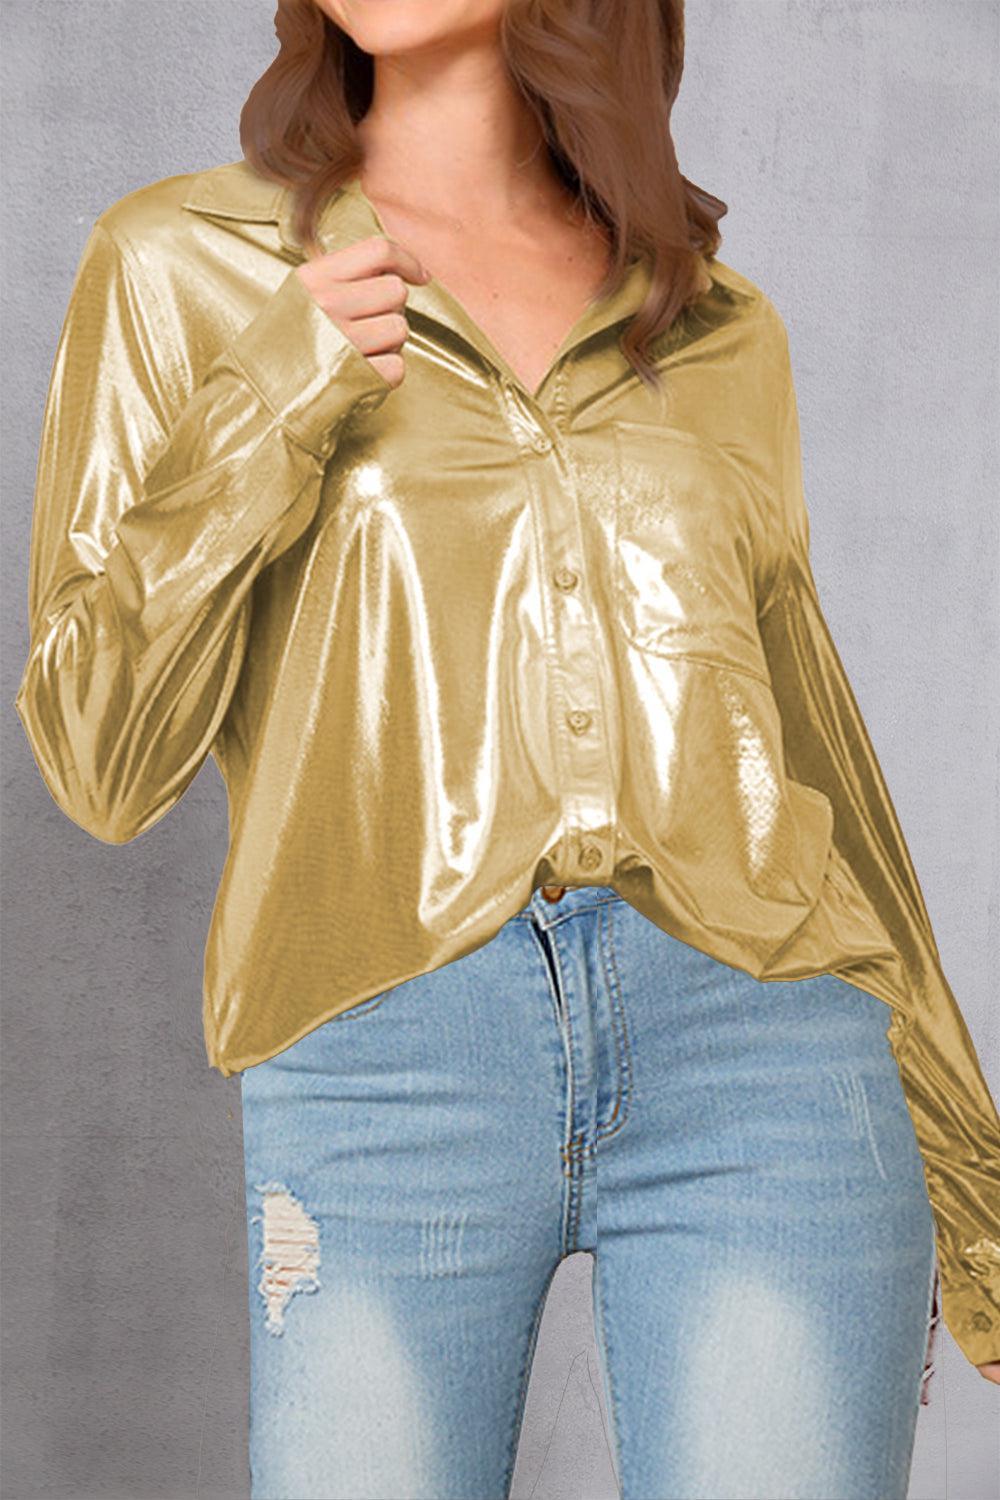 a woman wearing a gold shirt and ripped jeans